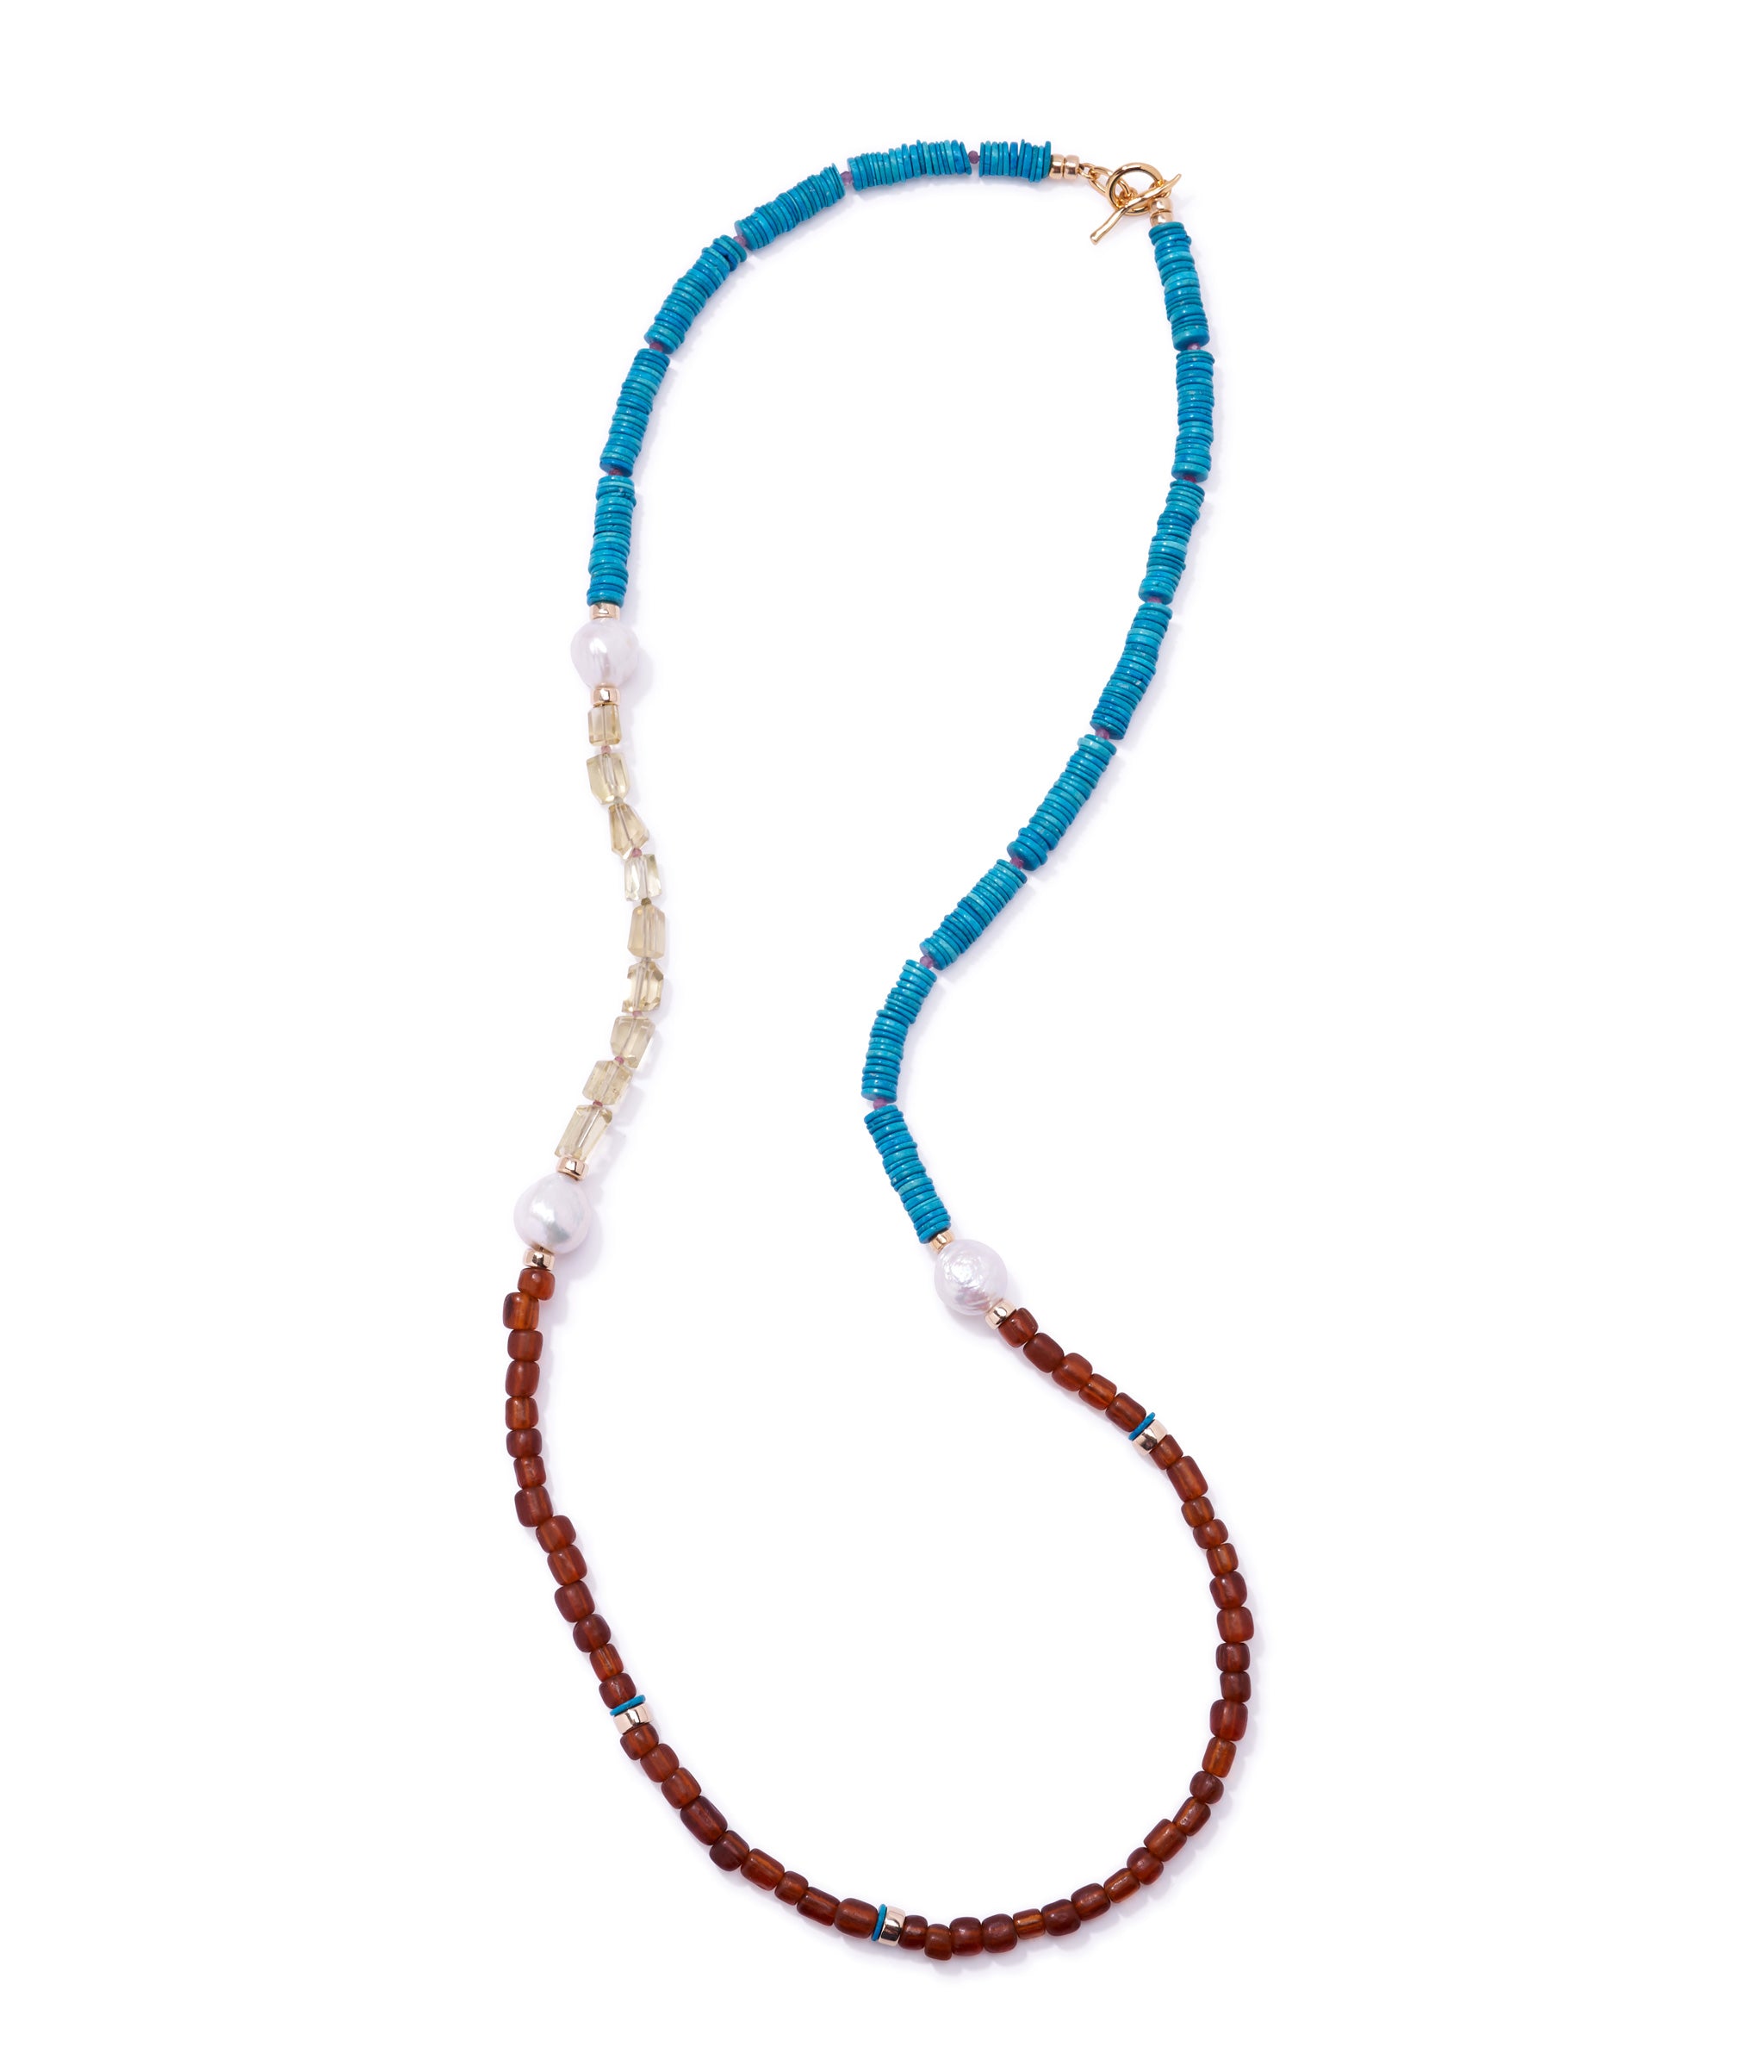 Cabana Necklace in Lagoon. Long single strand of color-blocked beads in blue howlite, amber glass, and lemon quartz